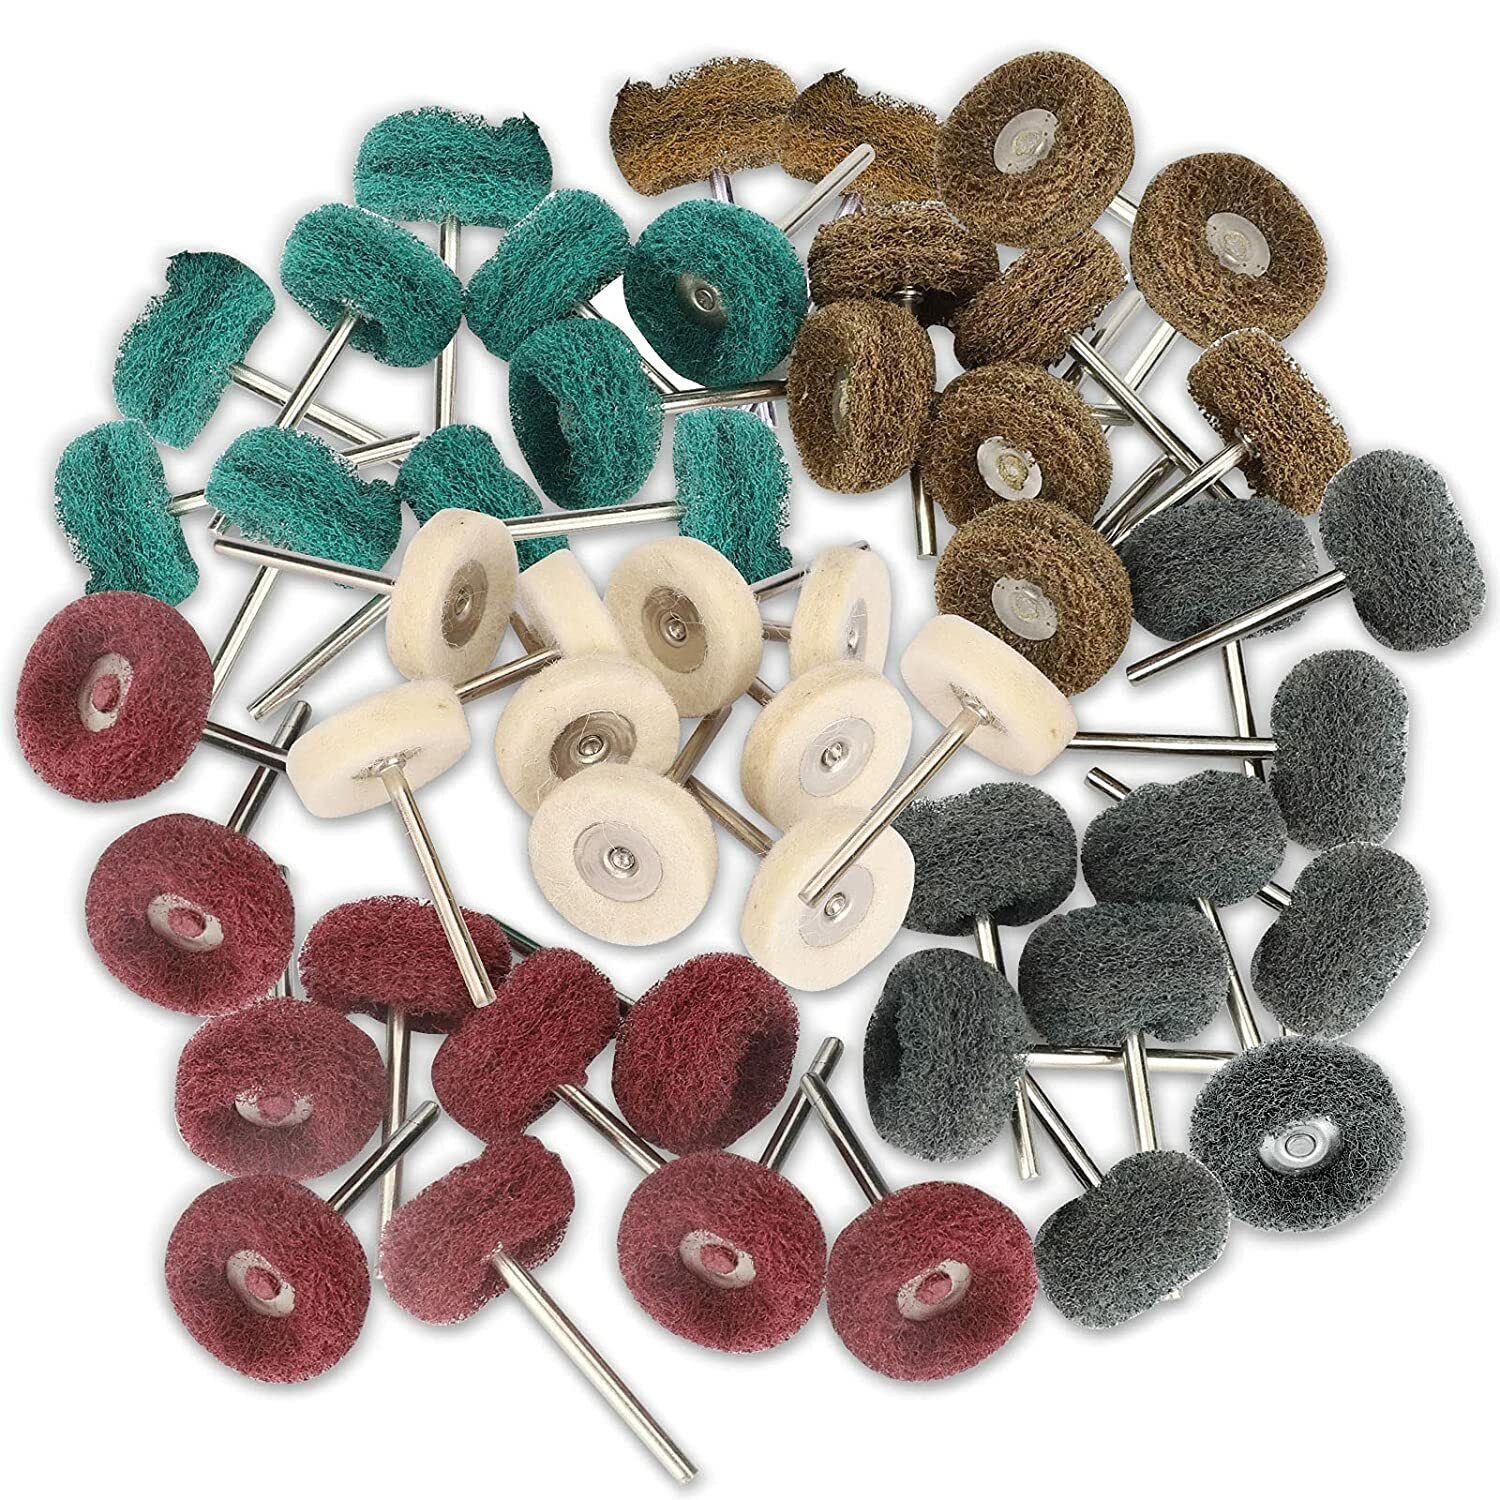 50 Metal Polishing Buffing Wheel Burr Kit Rotary Tool Accessories Set for Dremel Satc Does Not Apply